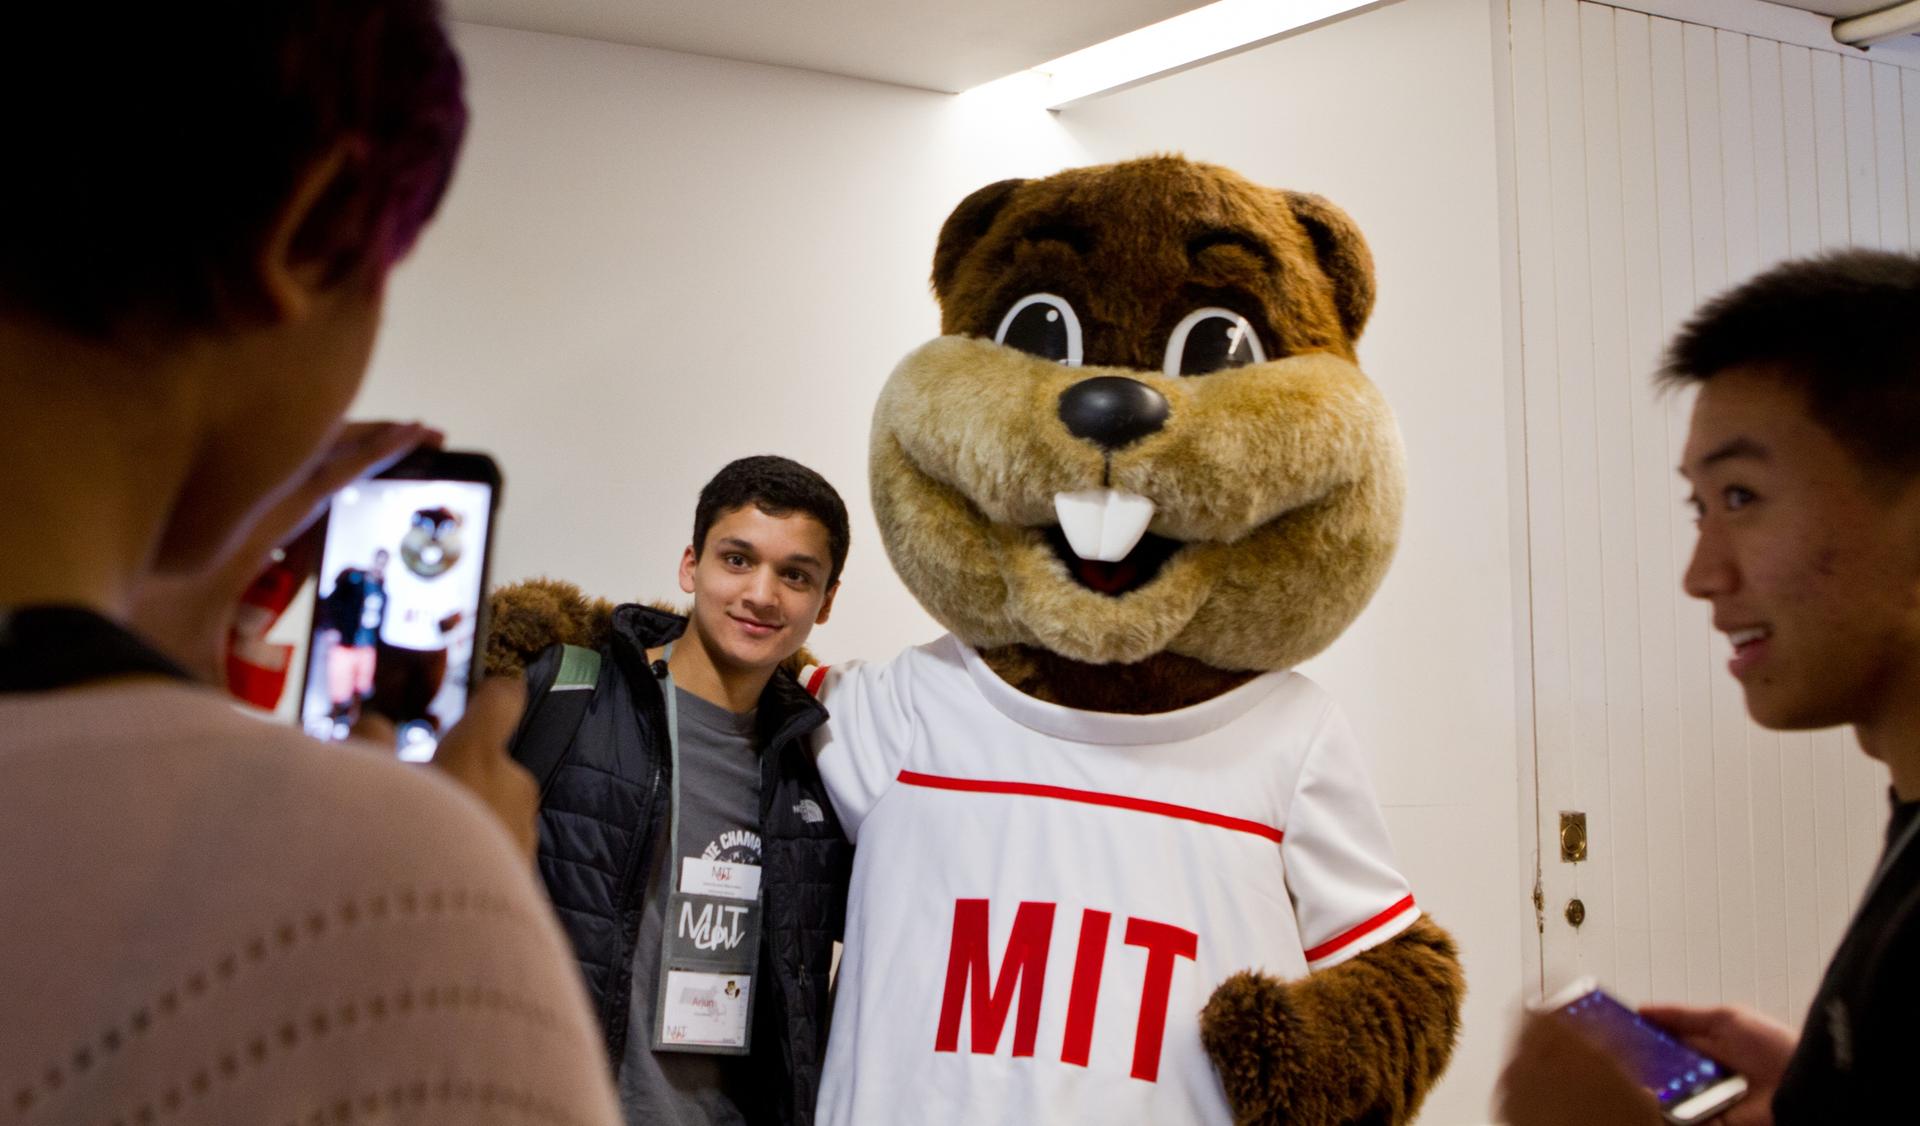 Admitted MIT students pose with the school's mascot during a weekend of activities at the university.